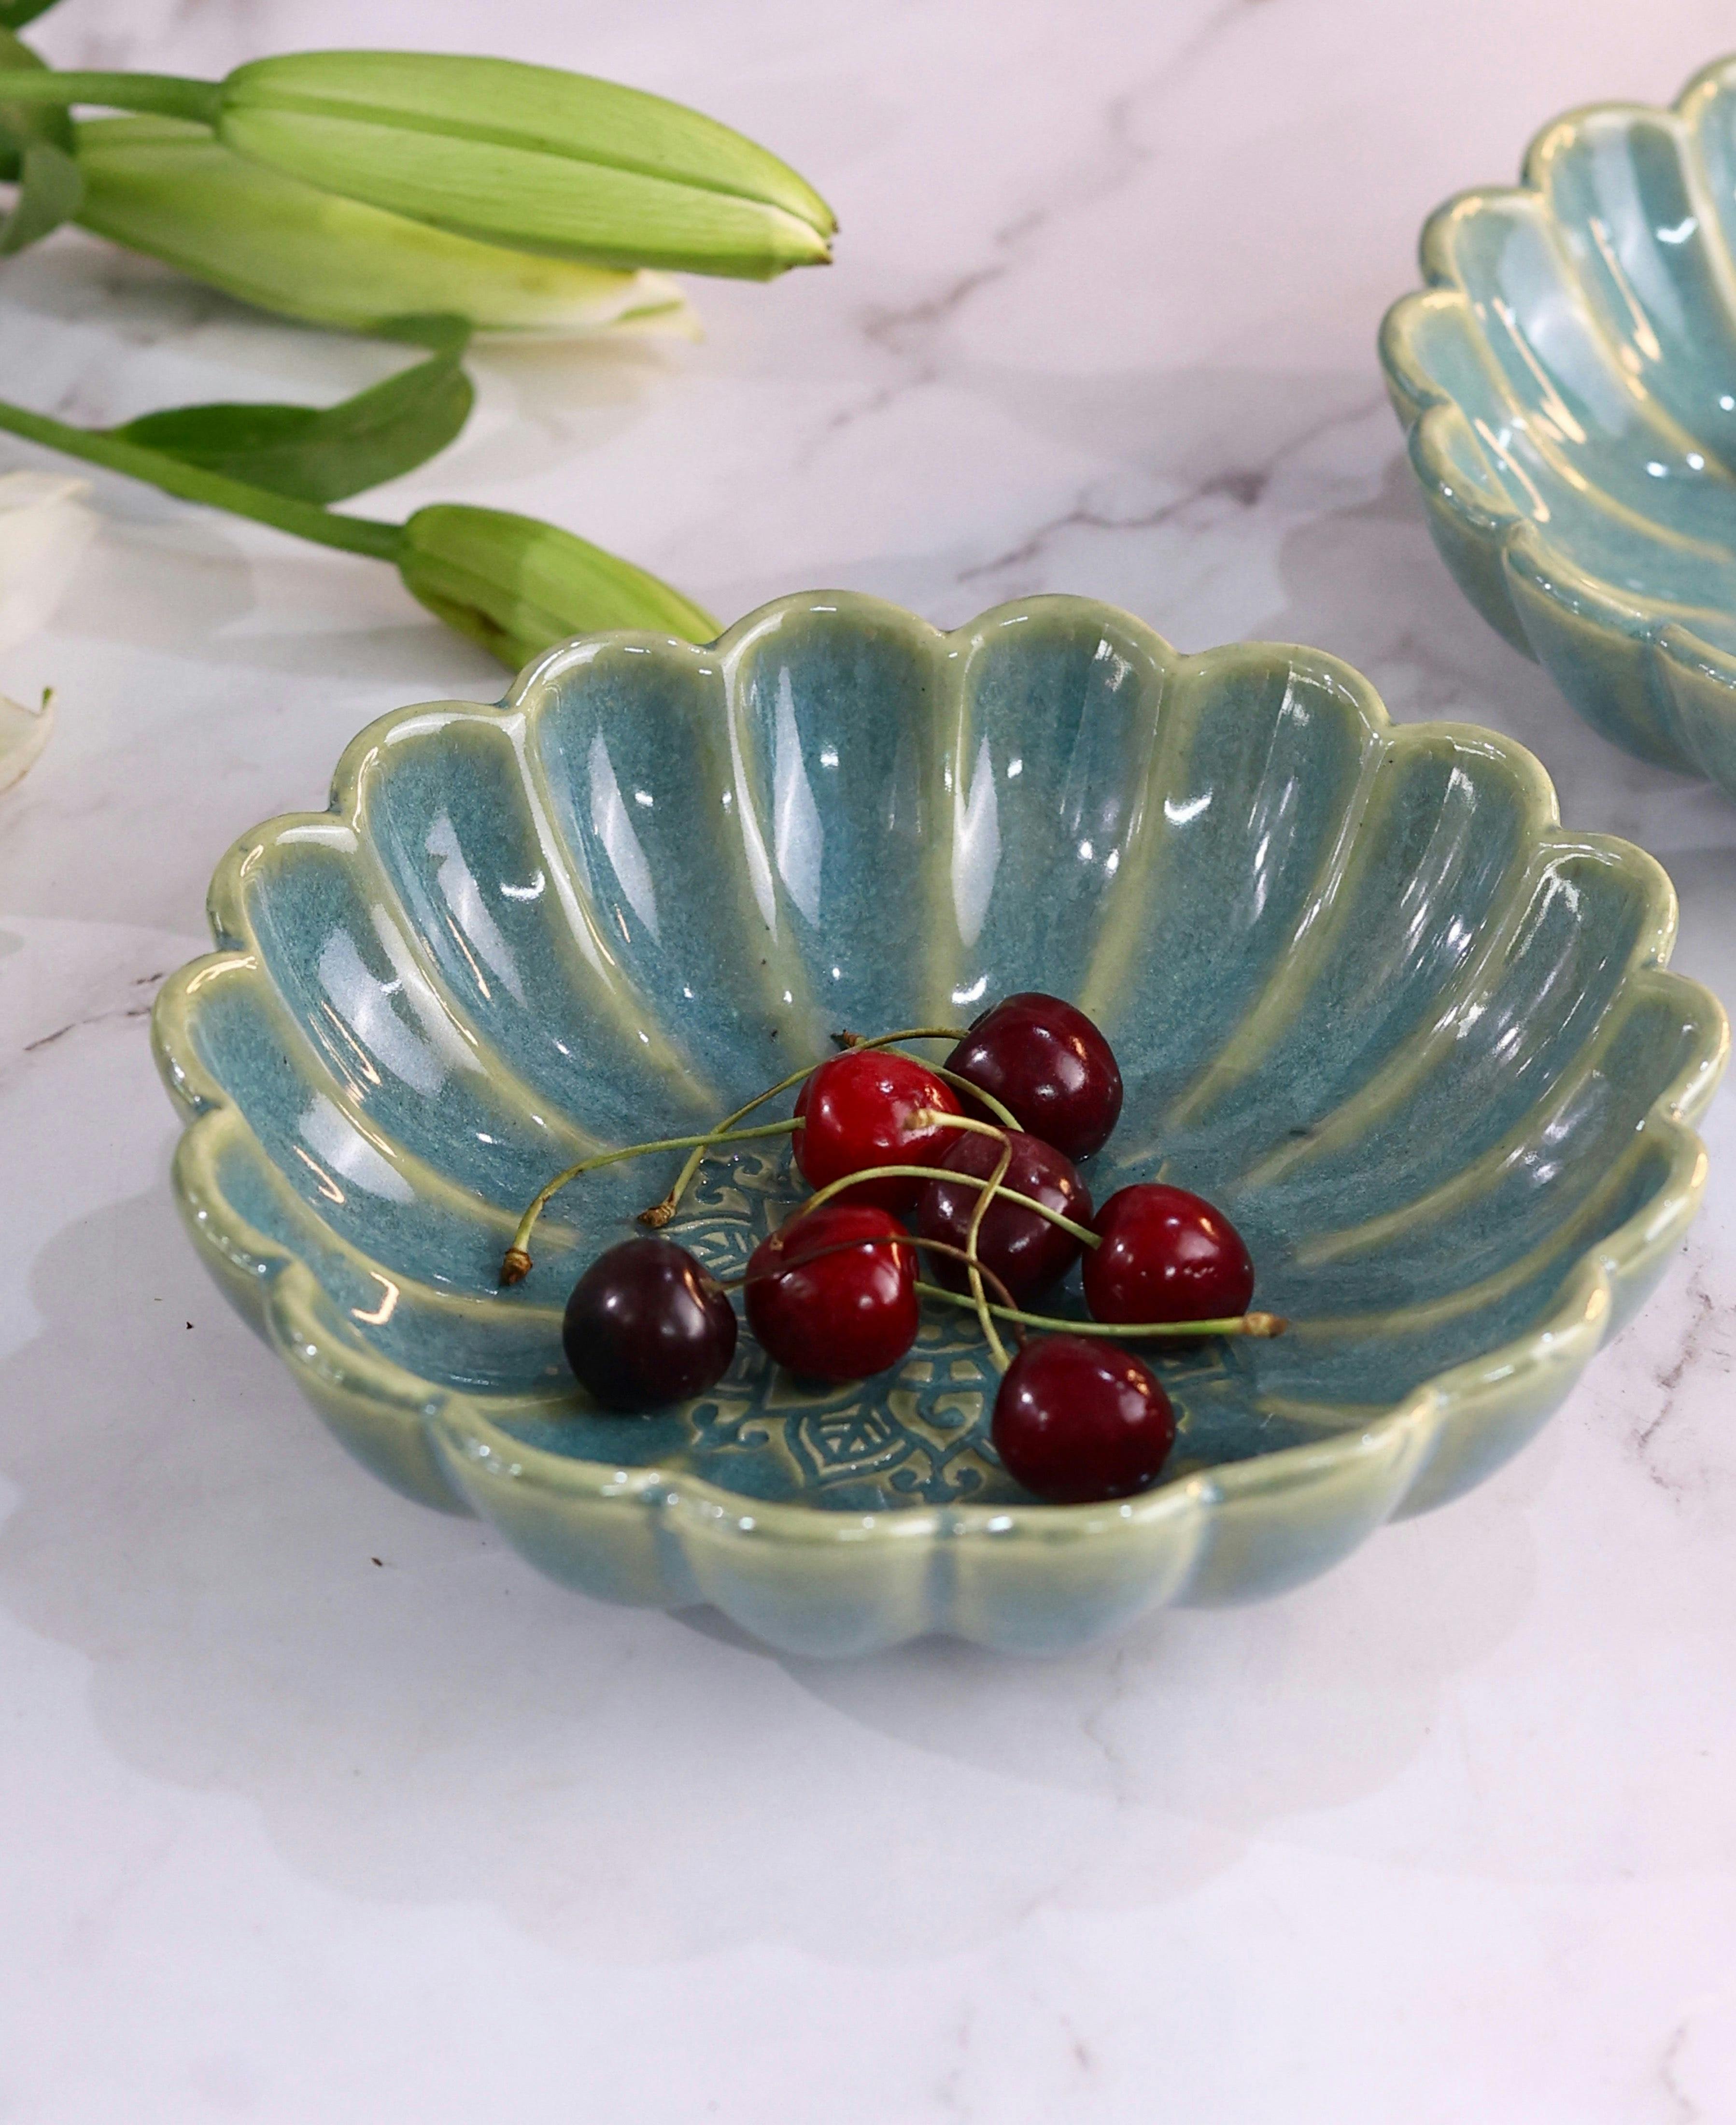 Green Scalloped Studio Pottery Shallow Bowl, a product by Olive Home accent